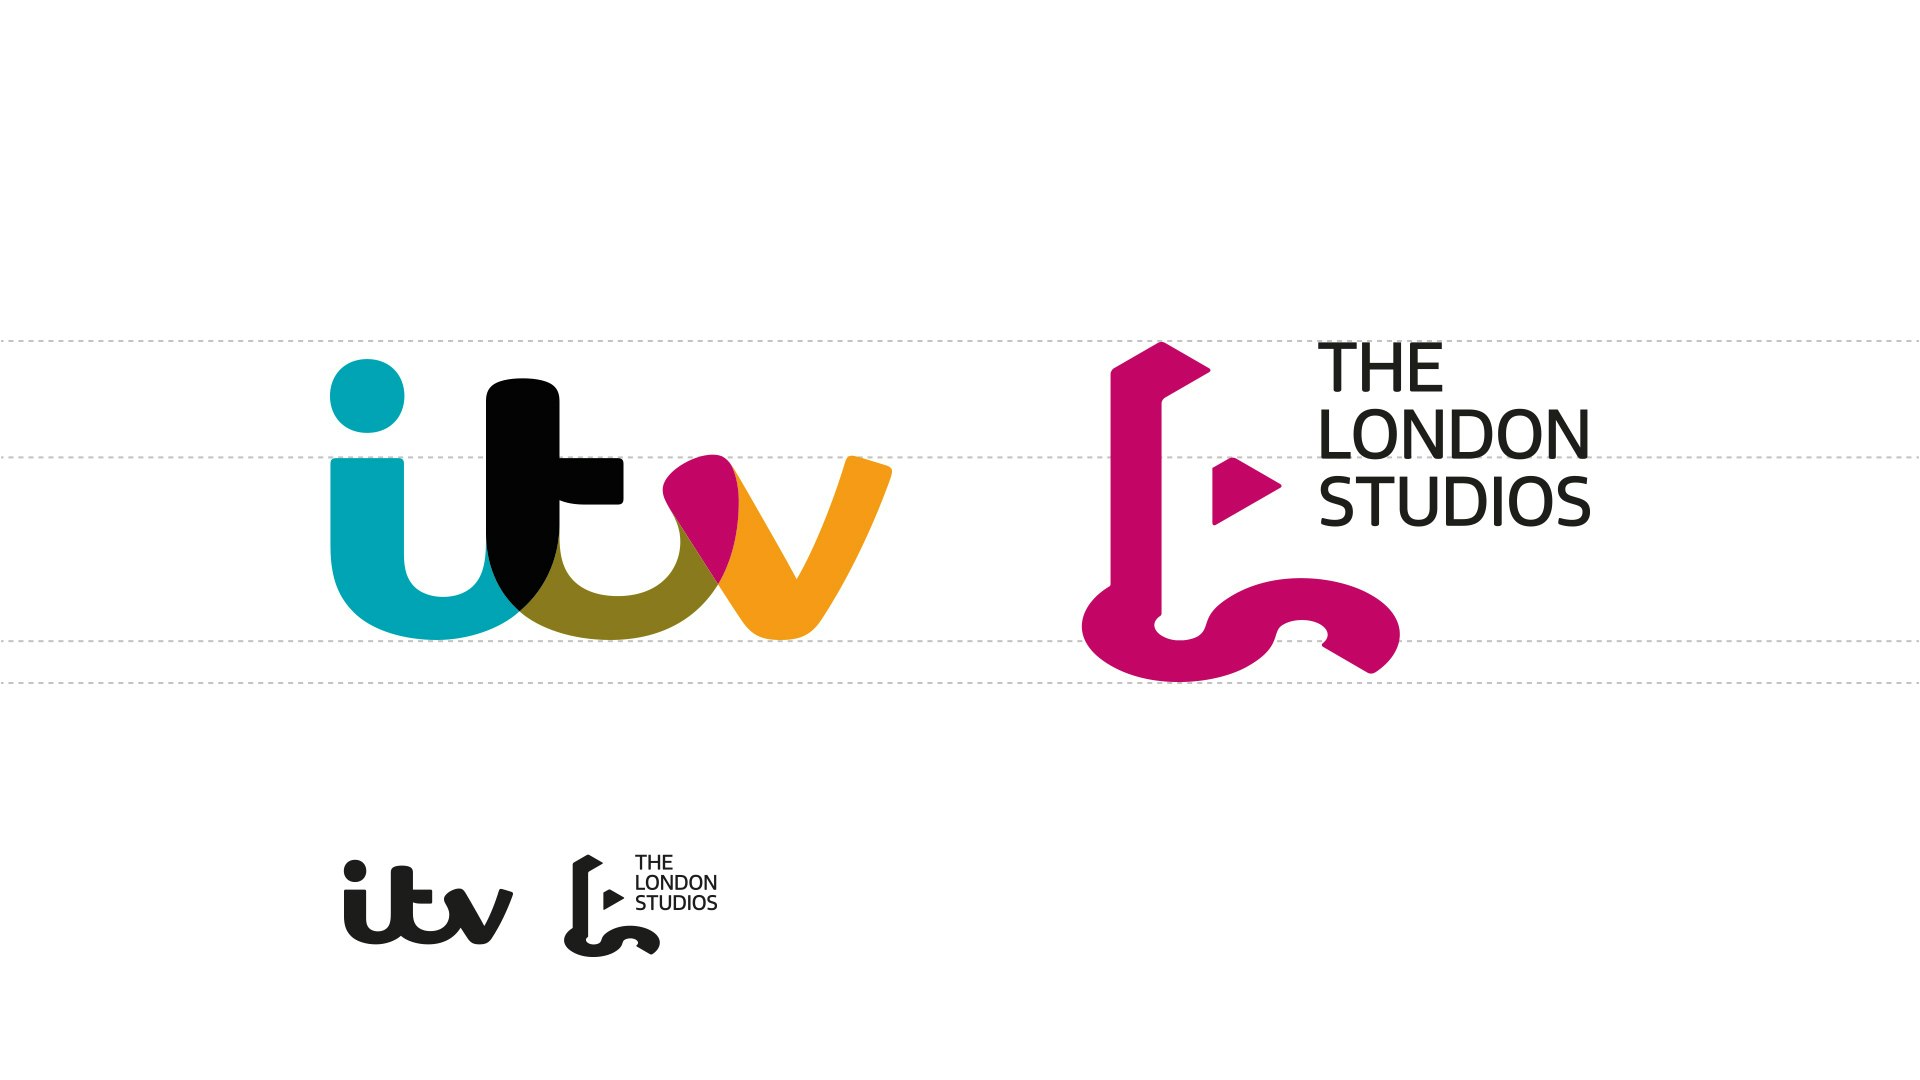 Jason Ford - The London Studios Alignment with ITV